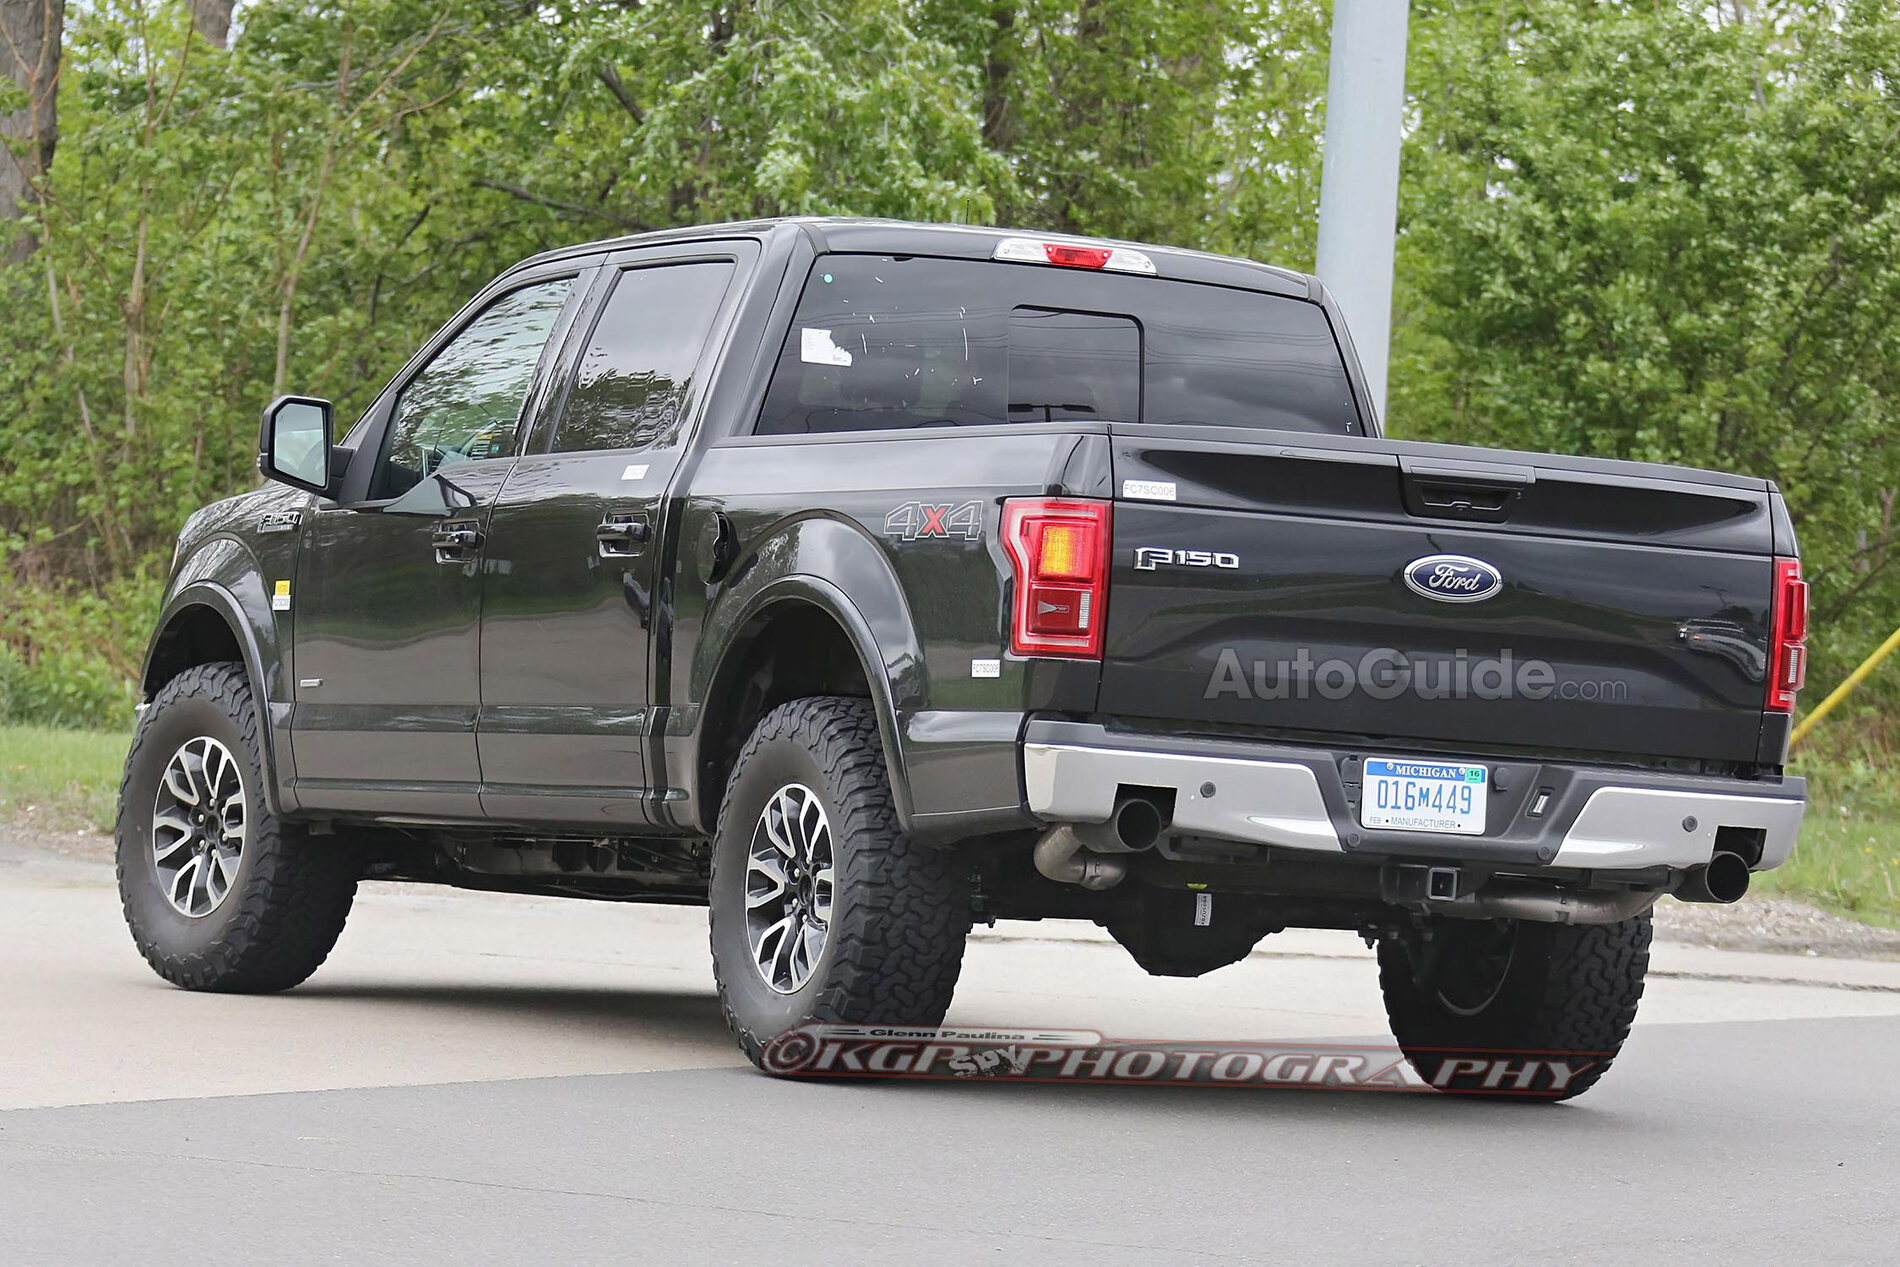 S650 Mustang S650 is out there somewhere, isn't she? Ford-F-150-Mule-Spy-Photo-14